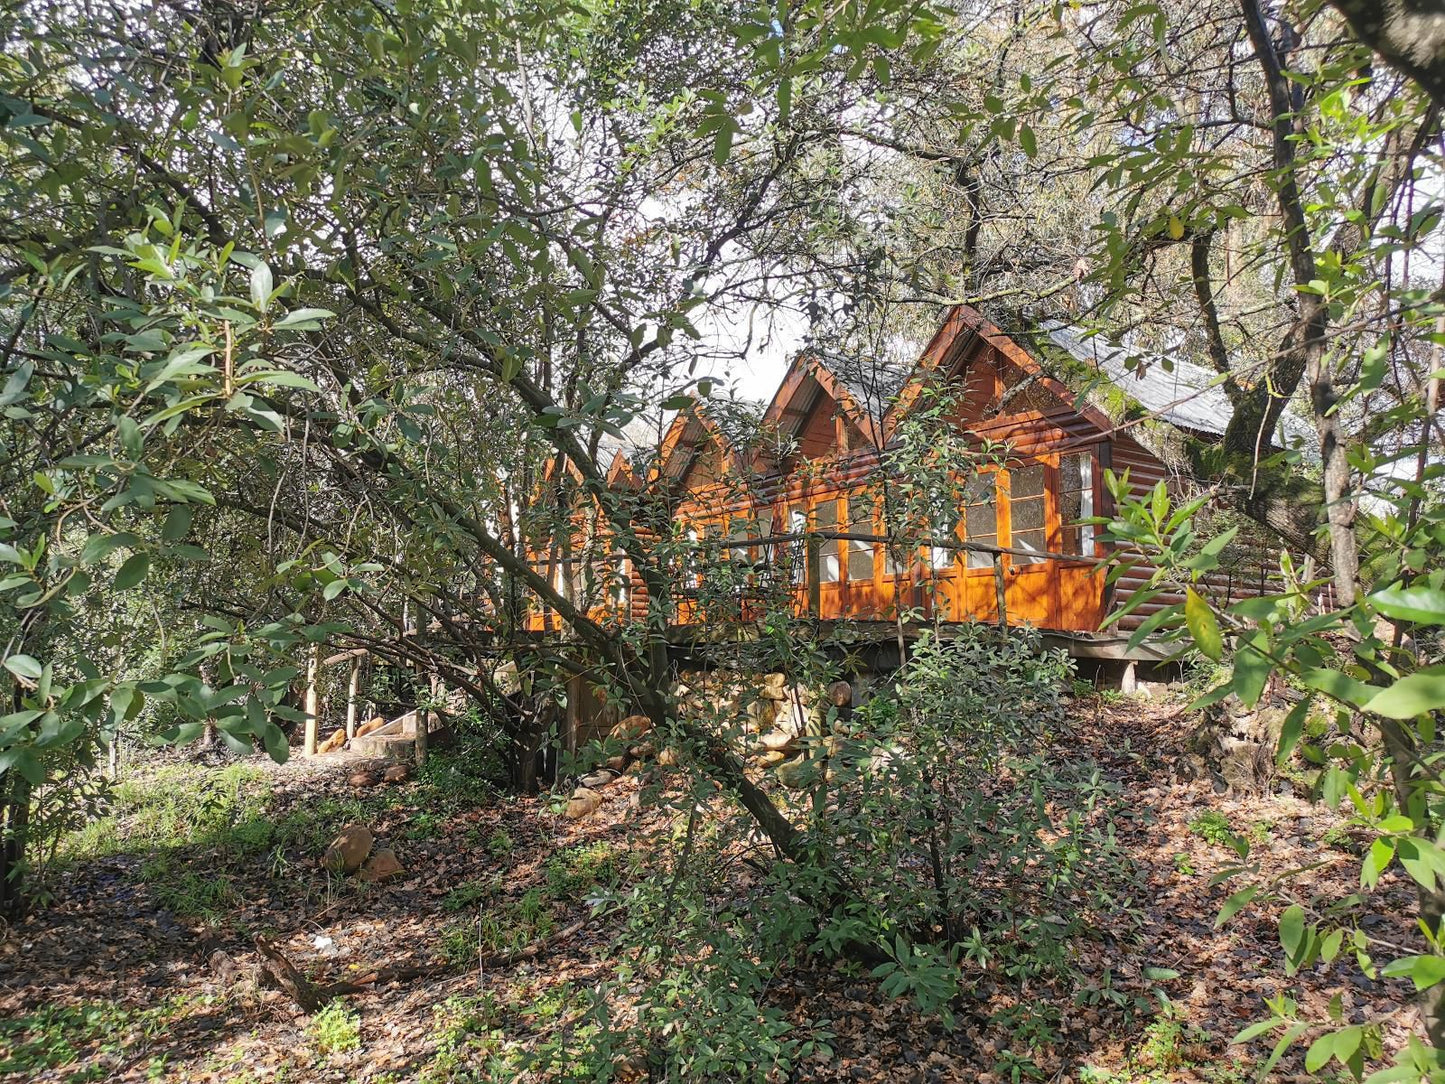 Otter S Bend Lodge Franschhoek Western Cape South Africa Cabin, Building, Architecture, Tree, Plant, Nature, Wood